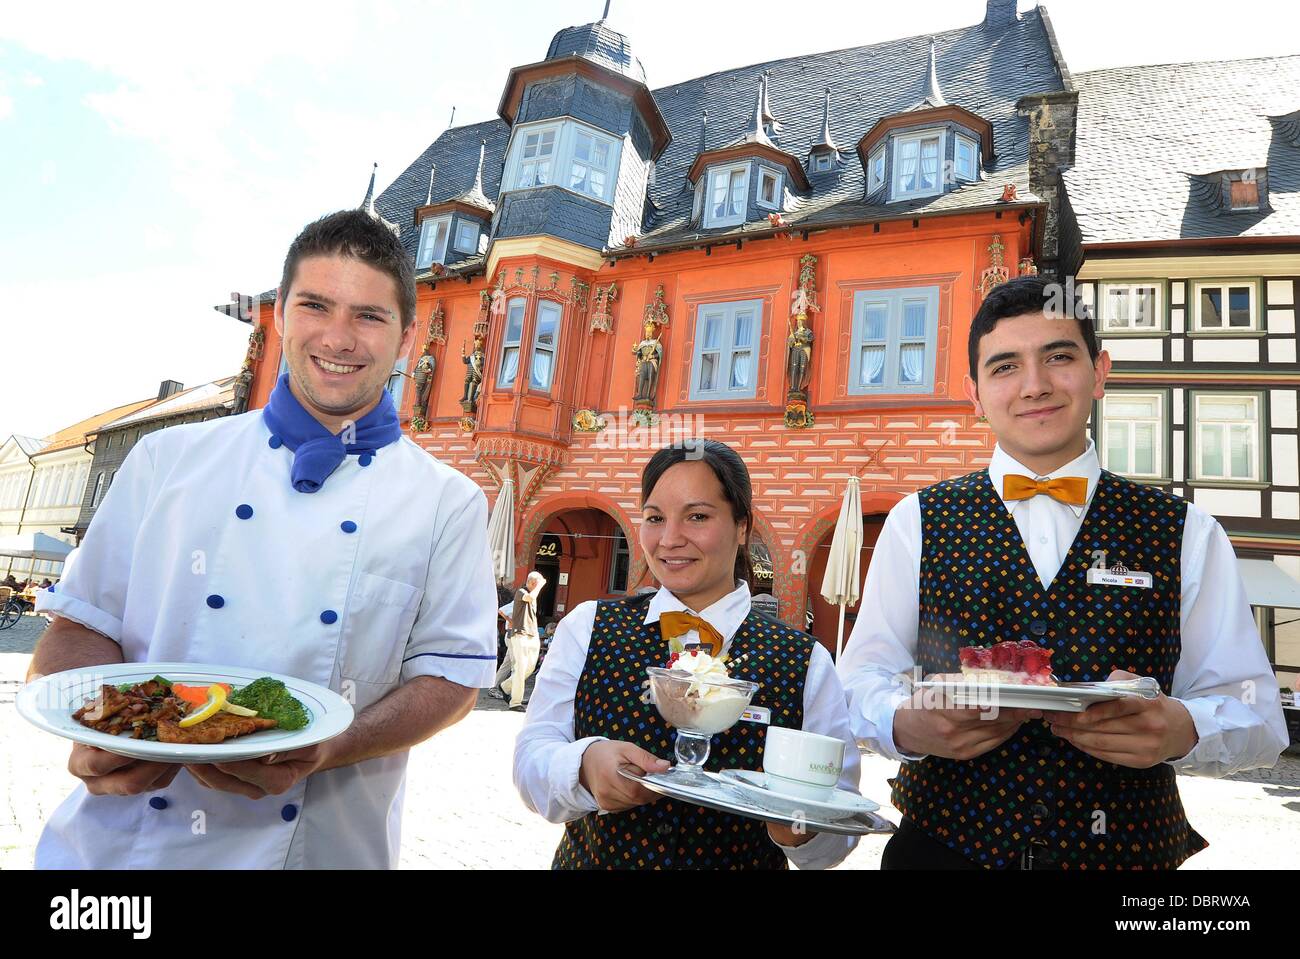 David Delgado (L-R), Iyedjda Corvo-Torres and Nicola Meza from Spain pose at Hotel Kaiserworth in Goslar, Germany, 01 August 2013. Corvo-Torres is one of seven gastronomy interns at the hotel. The internship is one year long. Photo: HOLGER HOLLEMANN Stock Photo